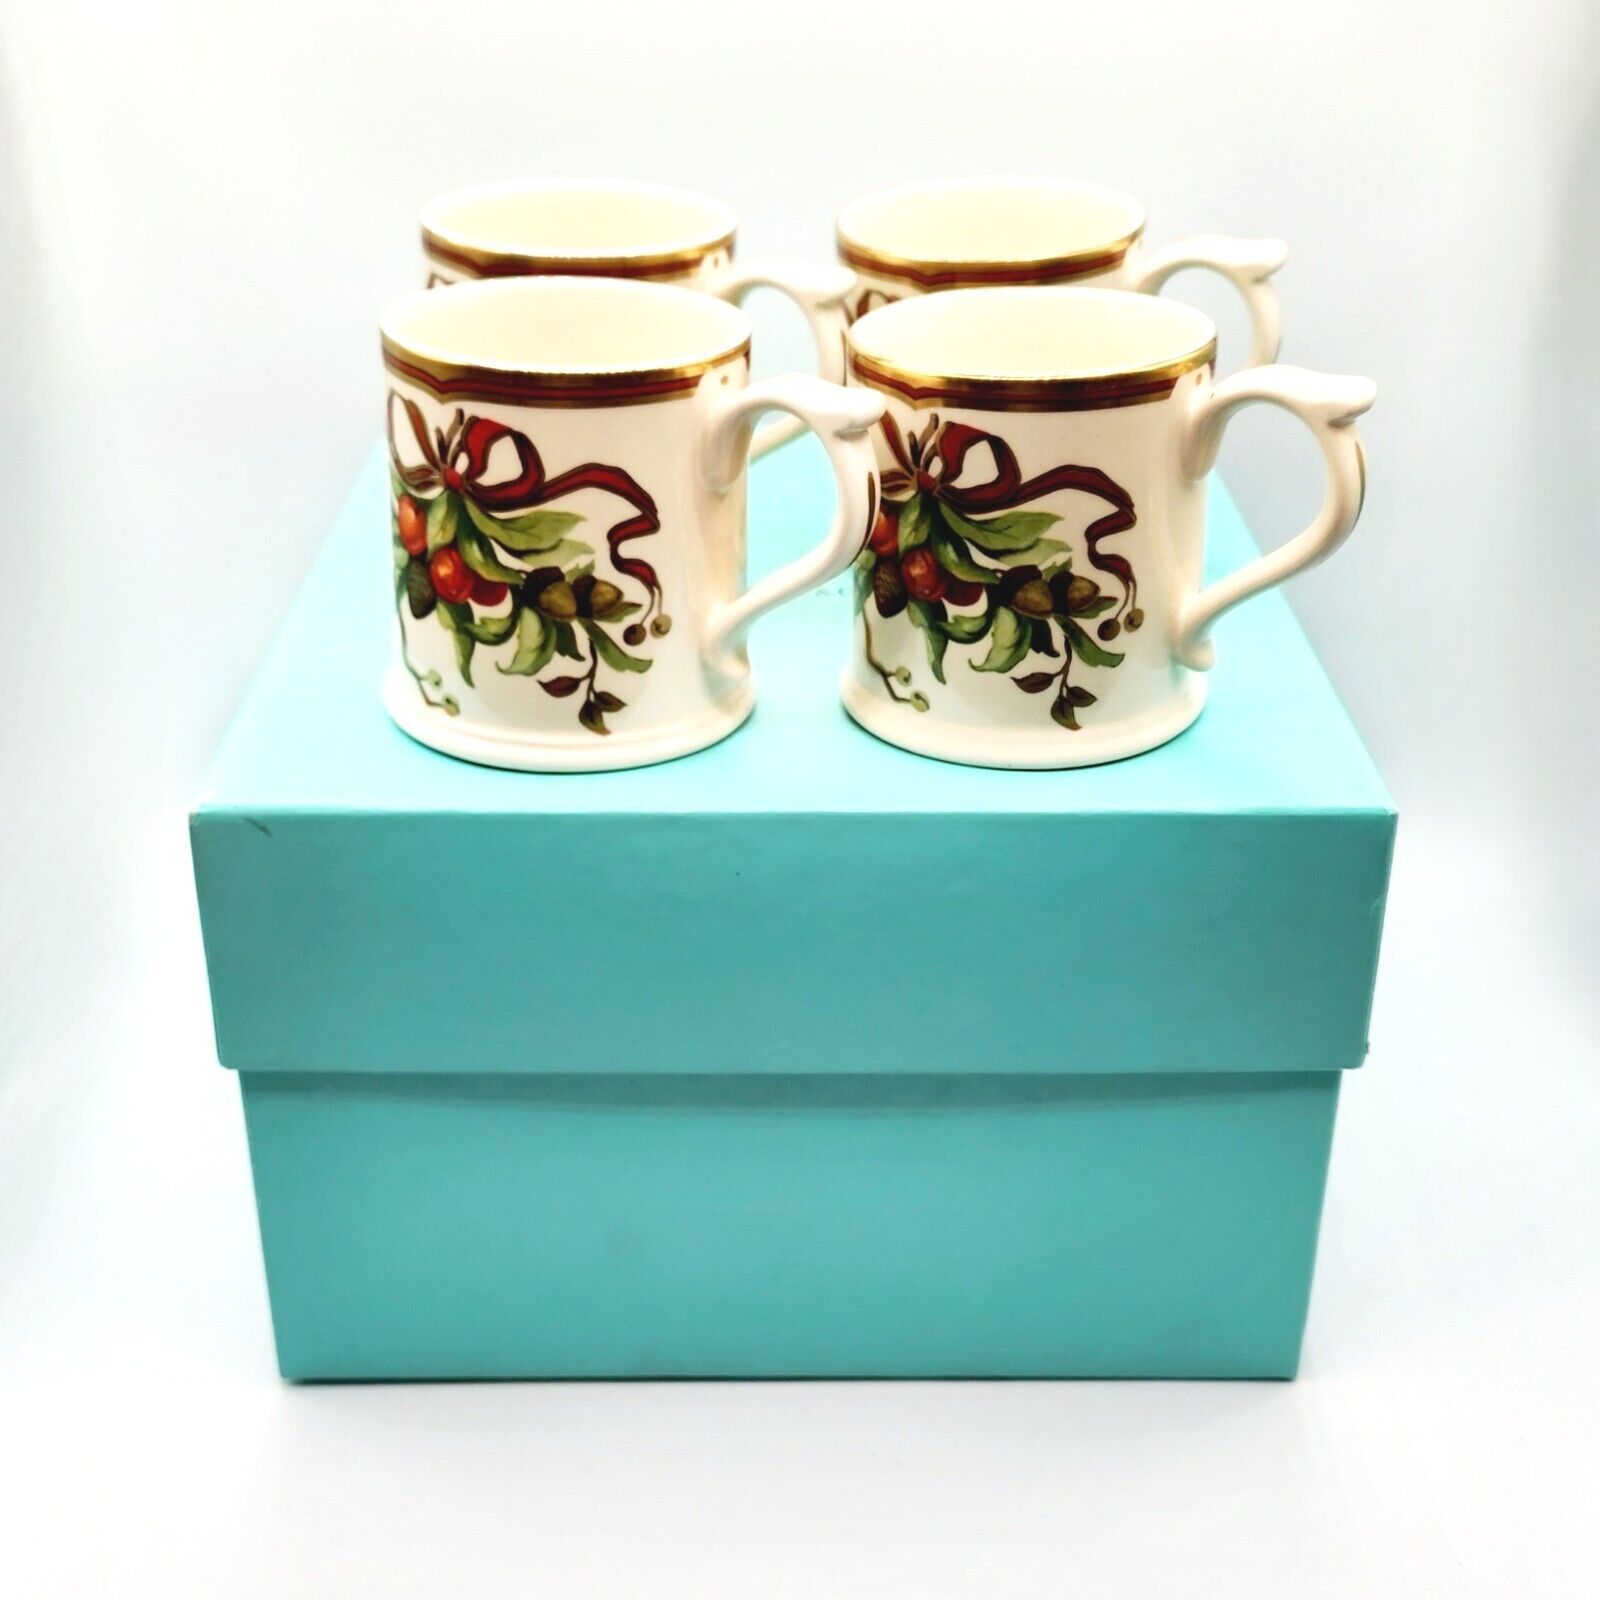 TIFFANY AND CO Tiffany Garland 4 Mugs - Box 10x10x6.5 Included.  Made In England